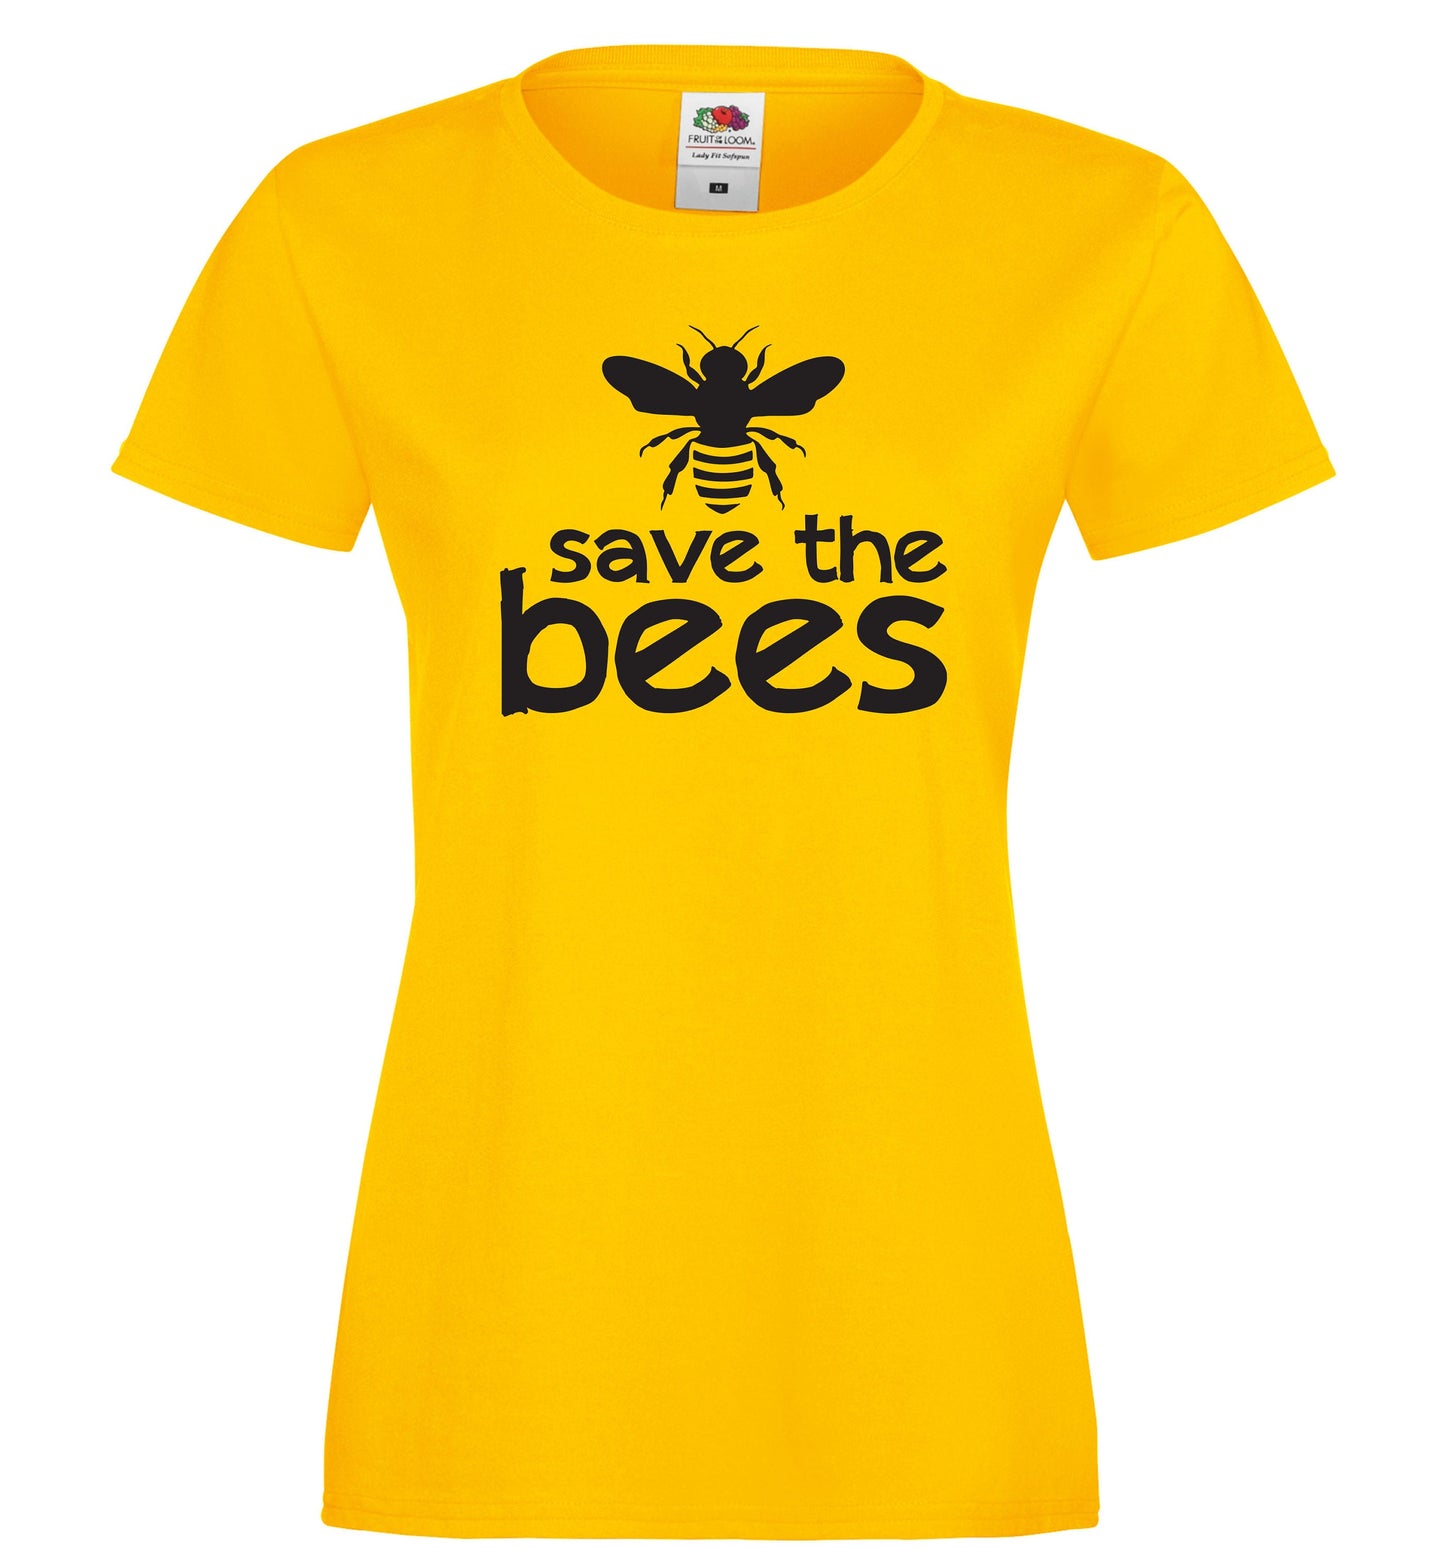 Save The Bees T-Shirt, Yellow Ladies Mens, Conservation, Nature, Environment